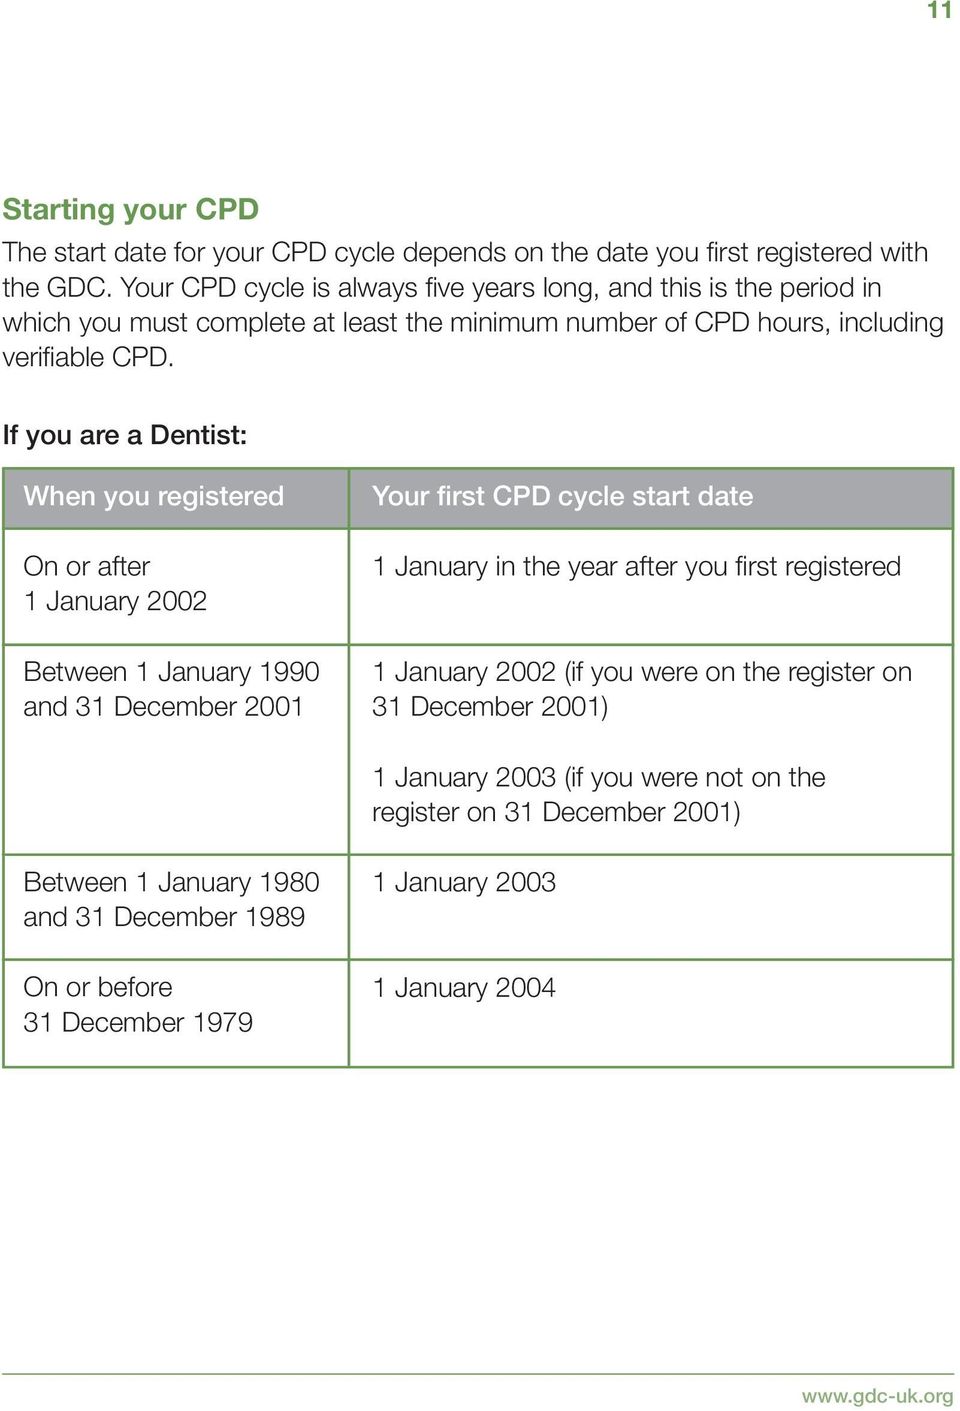 If you are a Dentist: When you registered On or after 1 January 2002 Between 1 January 1990 and 31 December 2001 Your first CPD cycle start date 1 January in the year after you